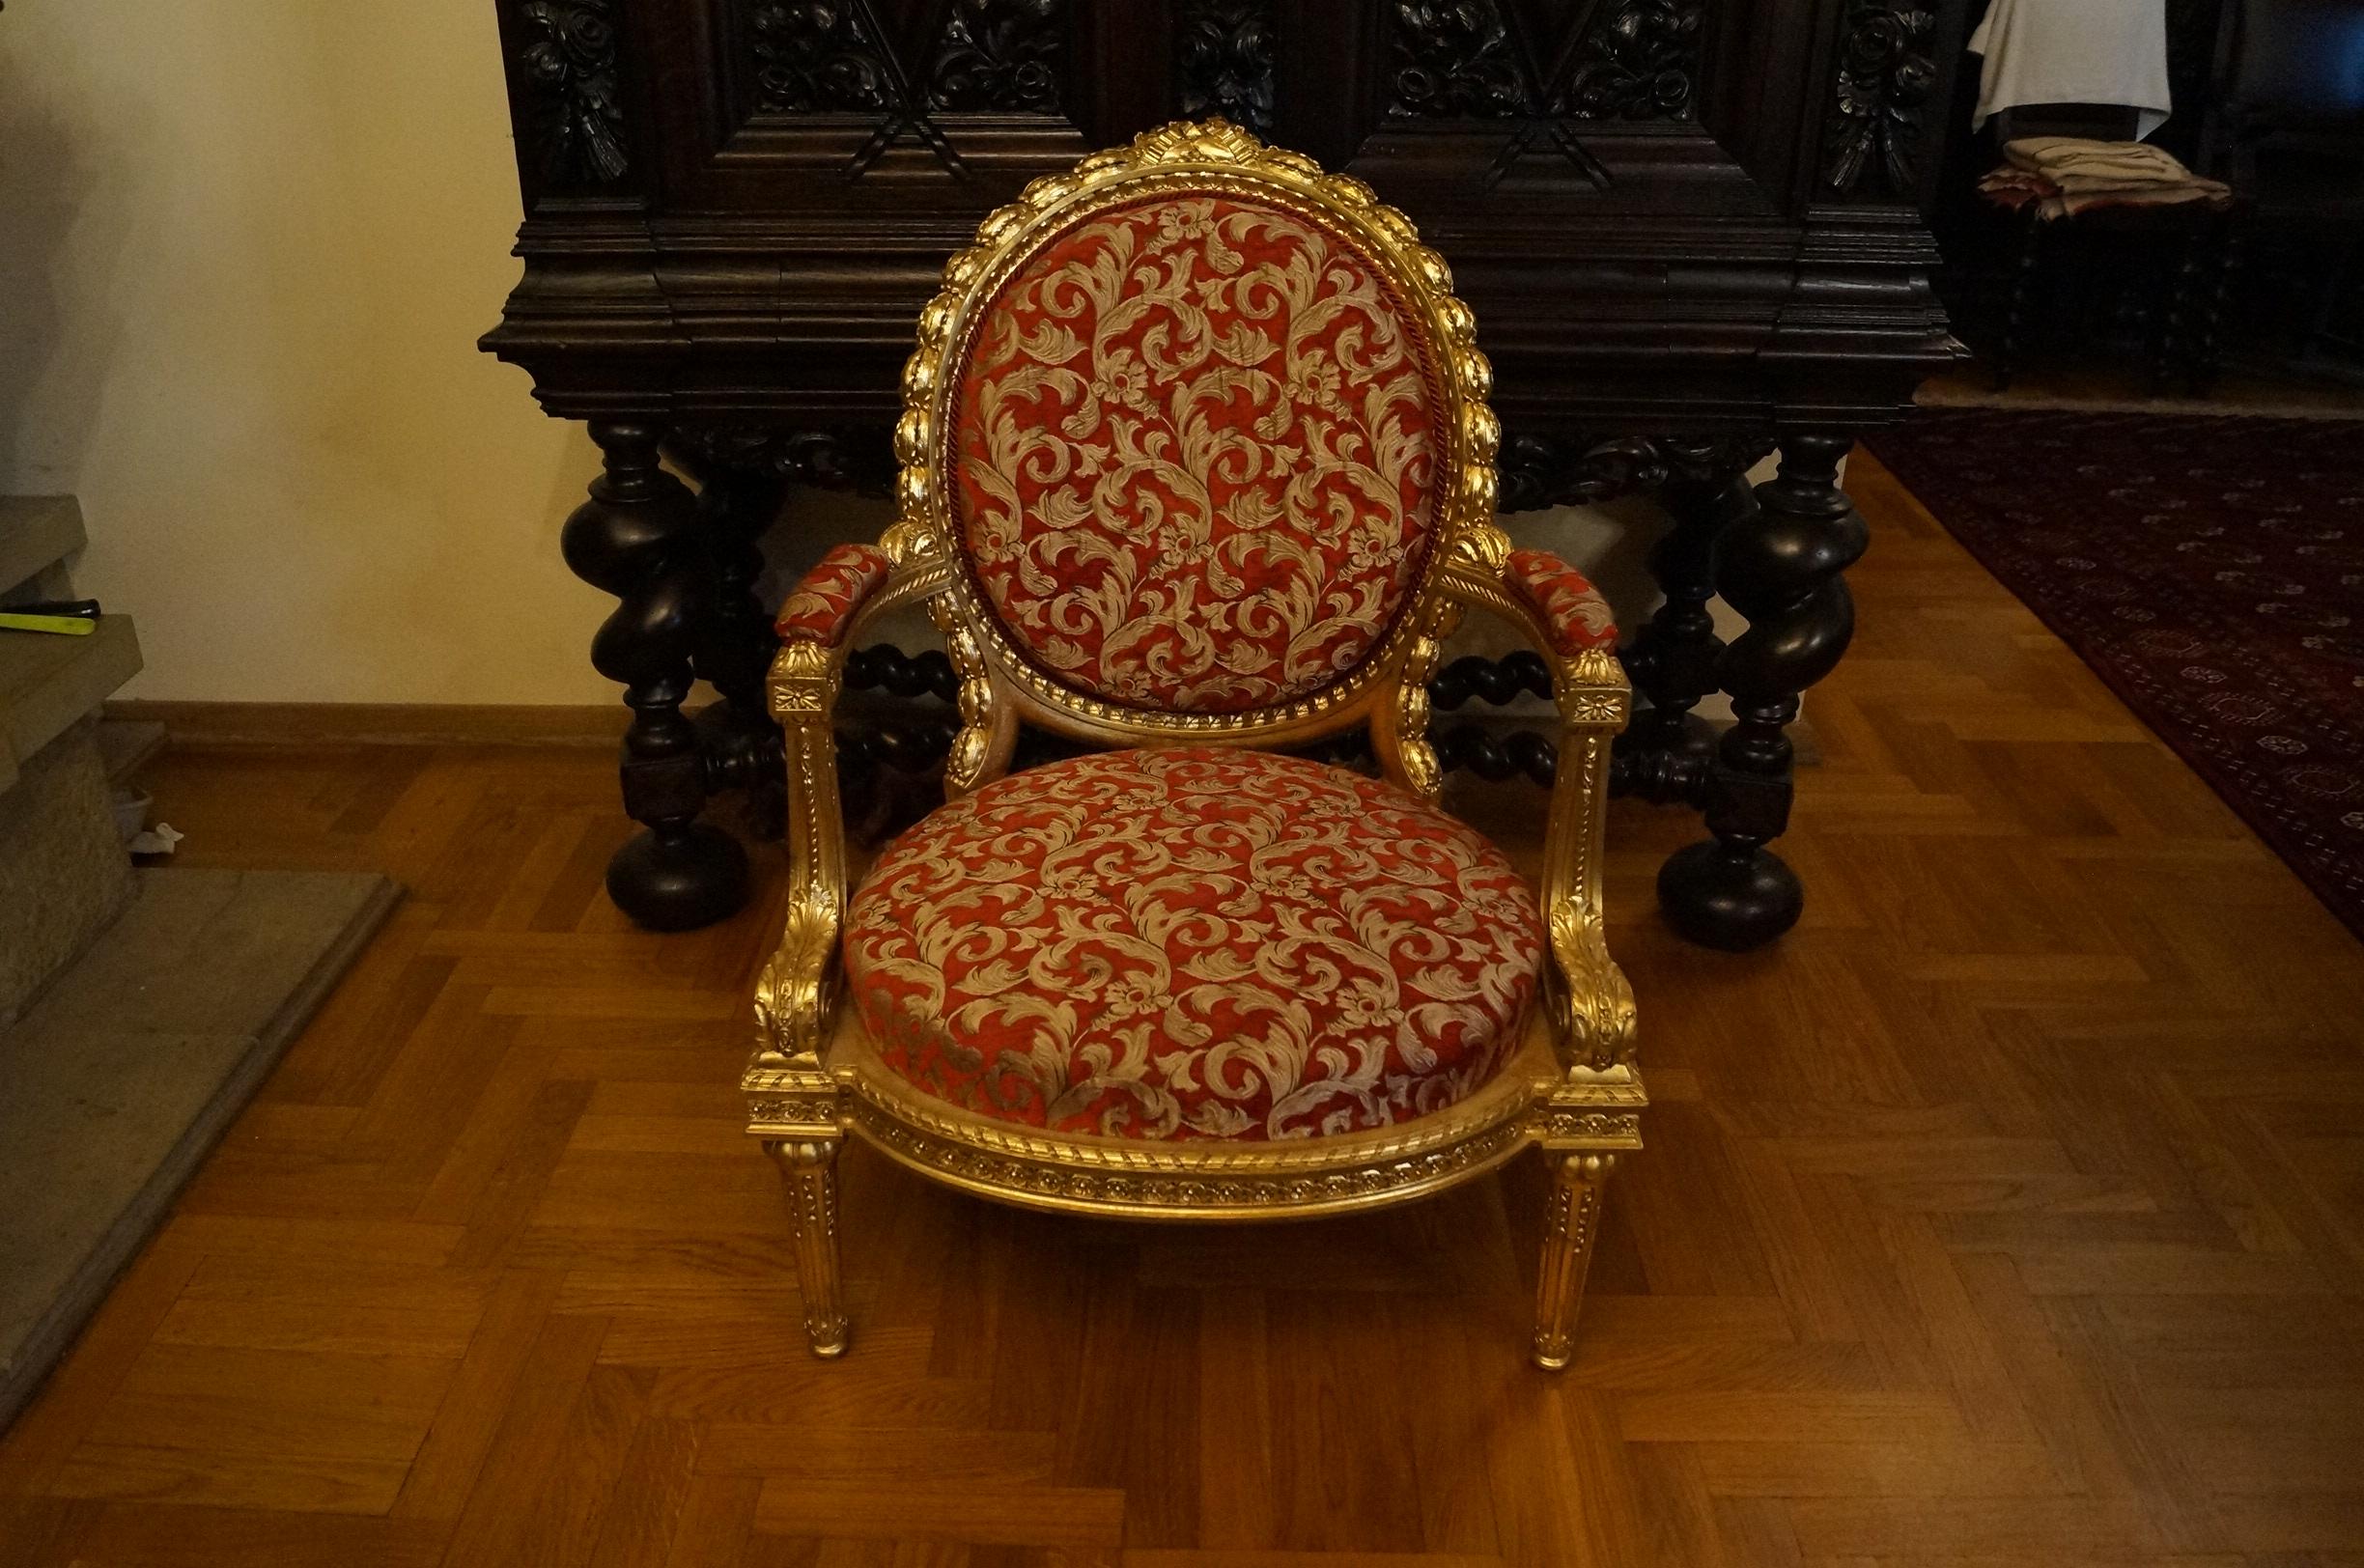 Gold-plated Louis XVI chair from 1860
Every piece of furniture that leaves our workshop from the beginning to the end is subjected to manual renovation, so as to restore its original condition from many years ago (It has been cleaned to bare